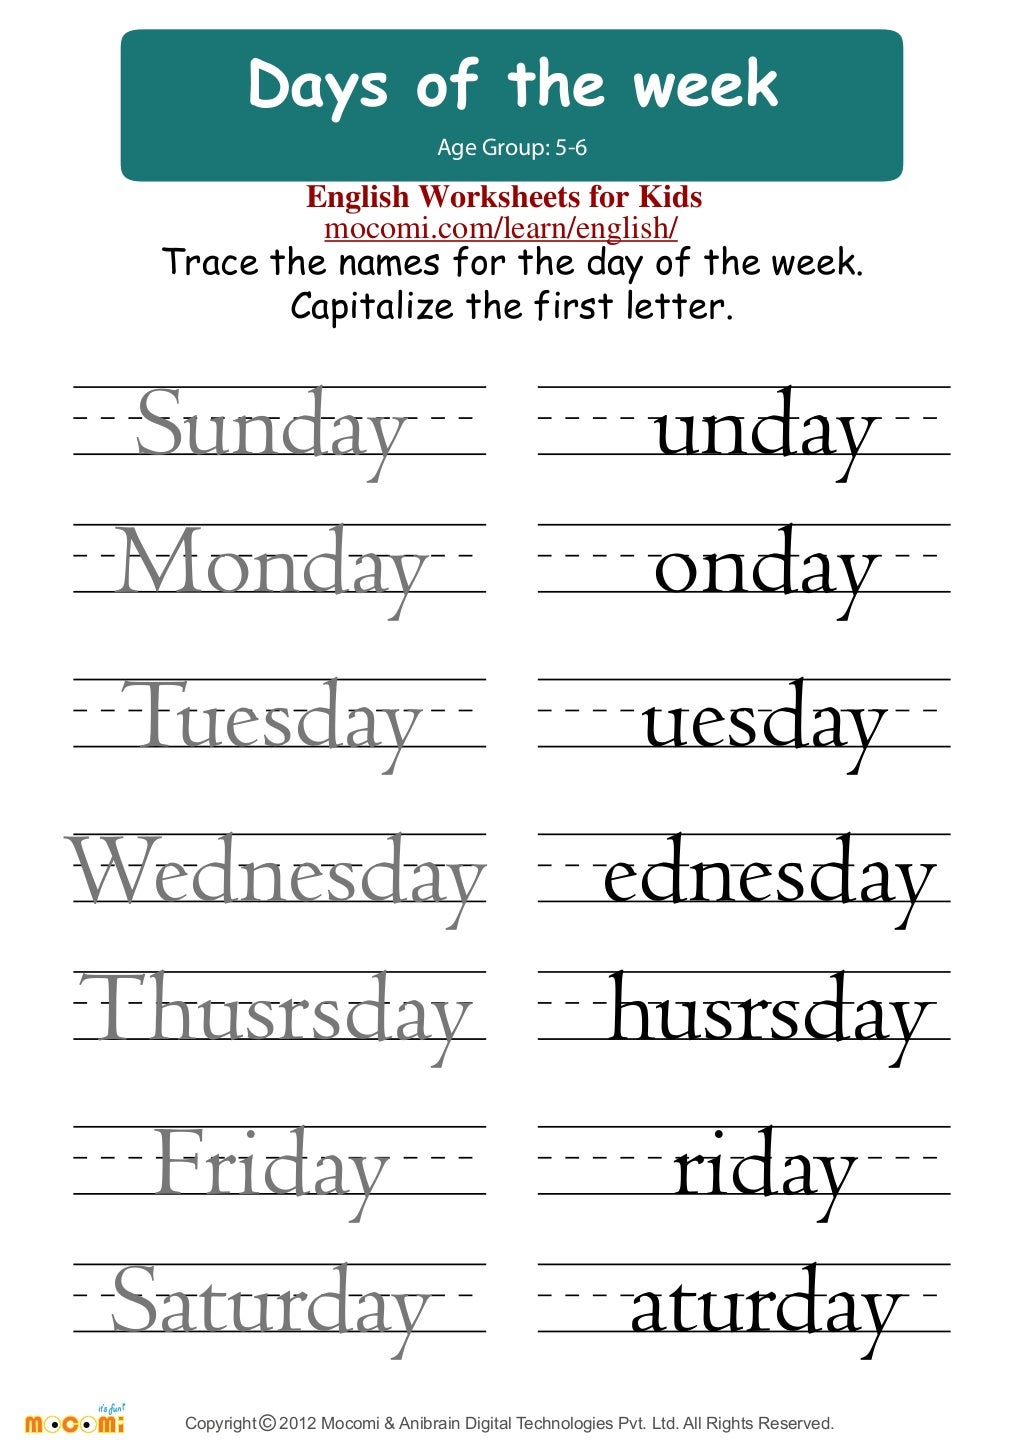 Days Of The Week English Worksheets For Kids